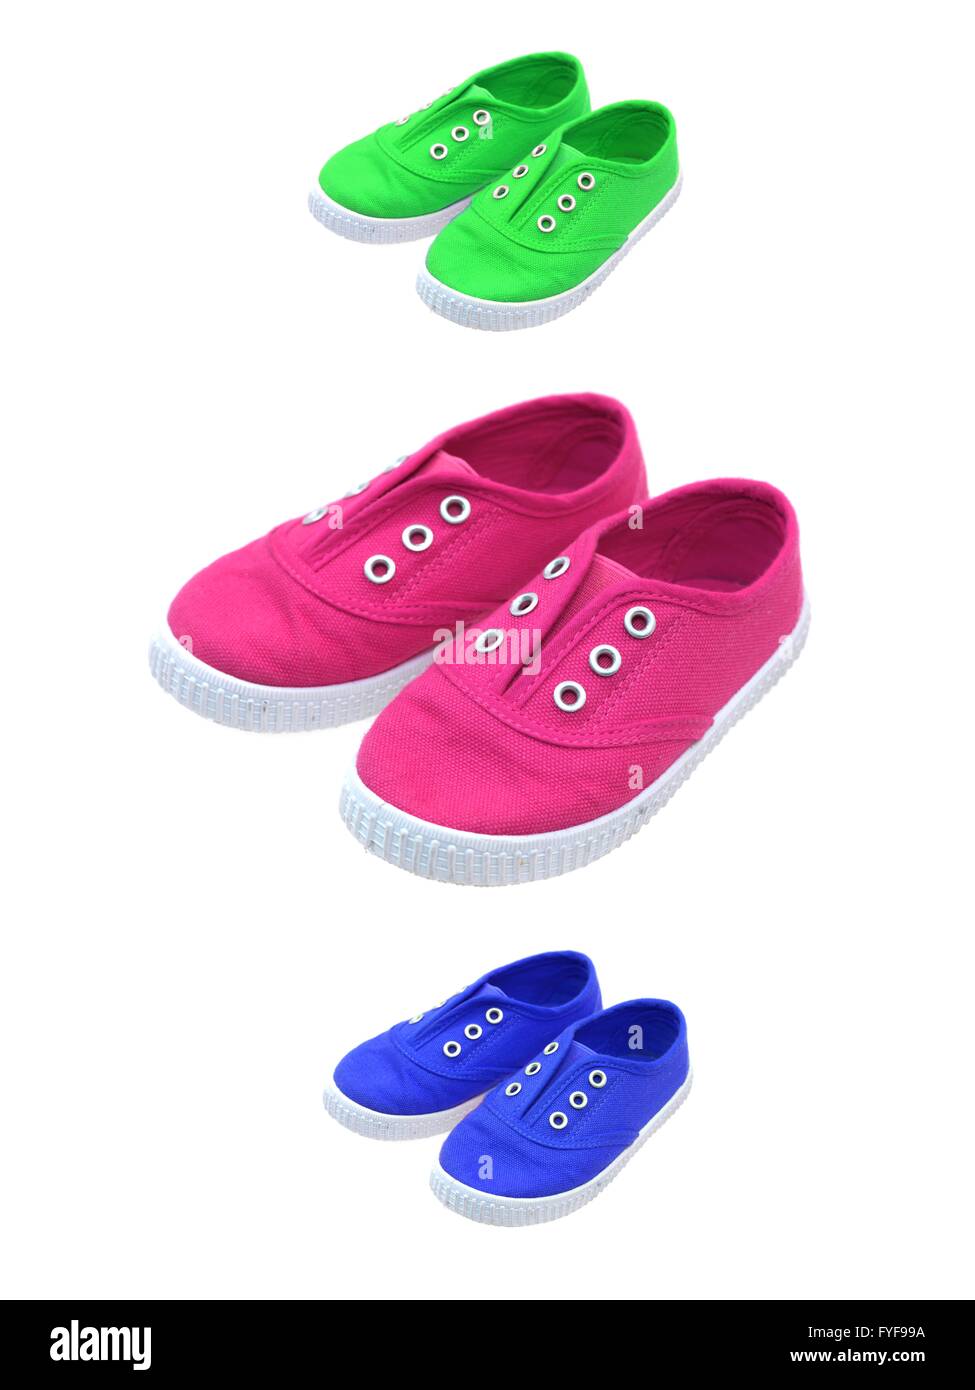 Childrens canvas shoes isolated against a white background Stock Photo